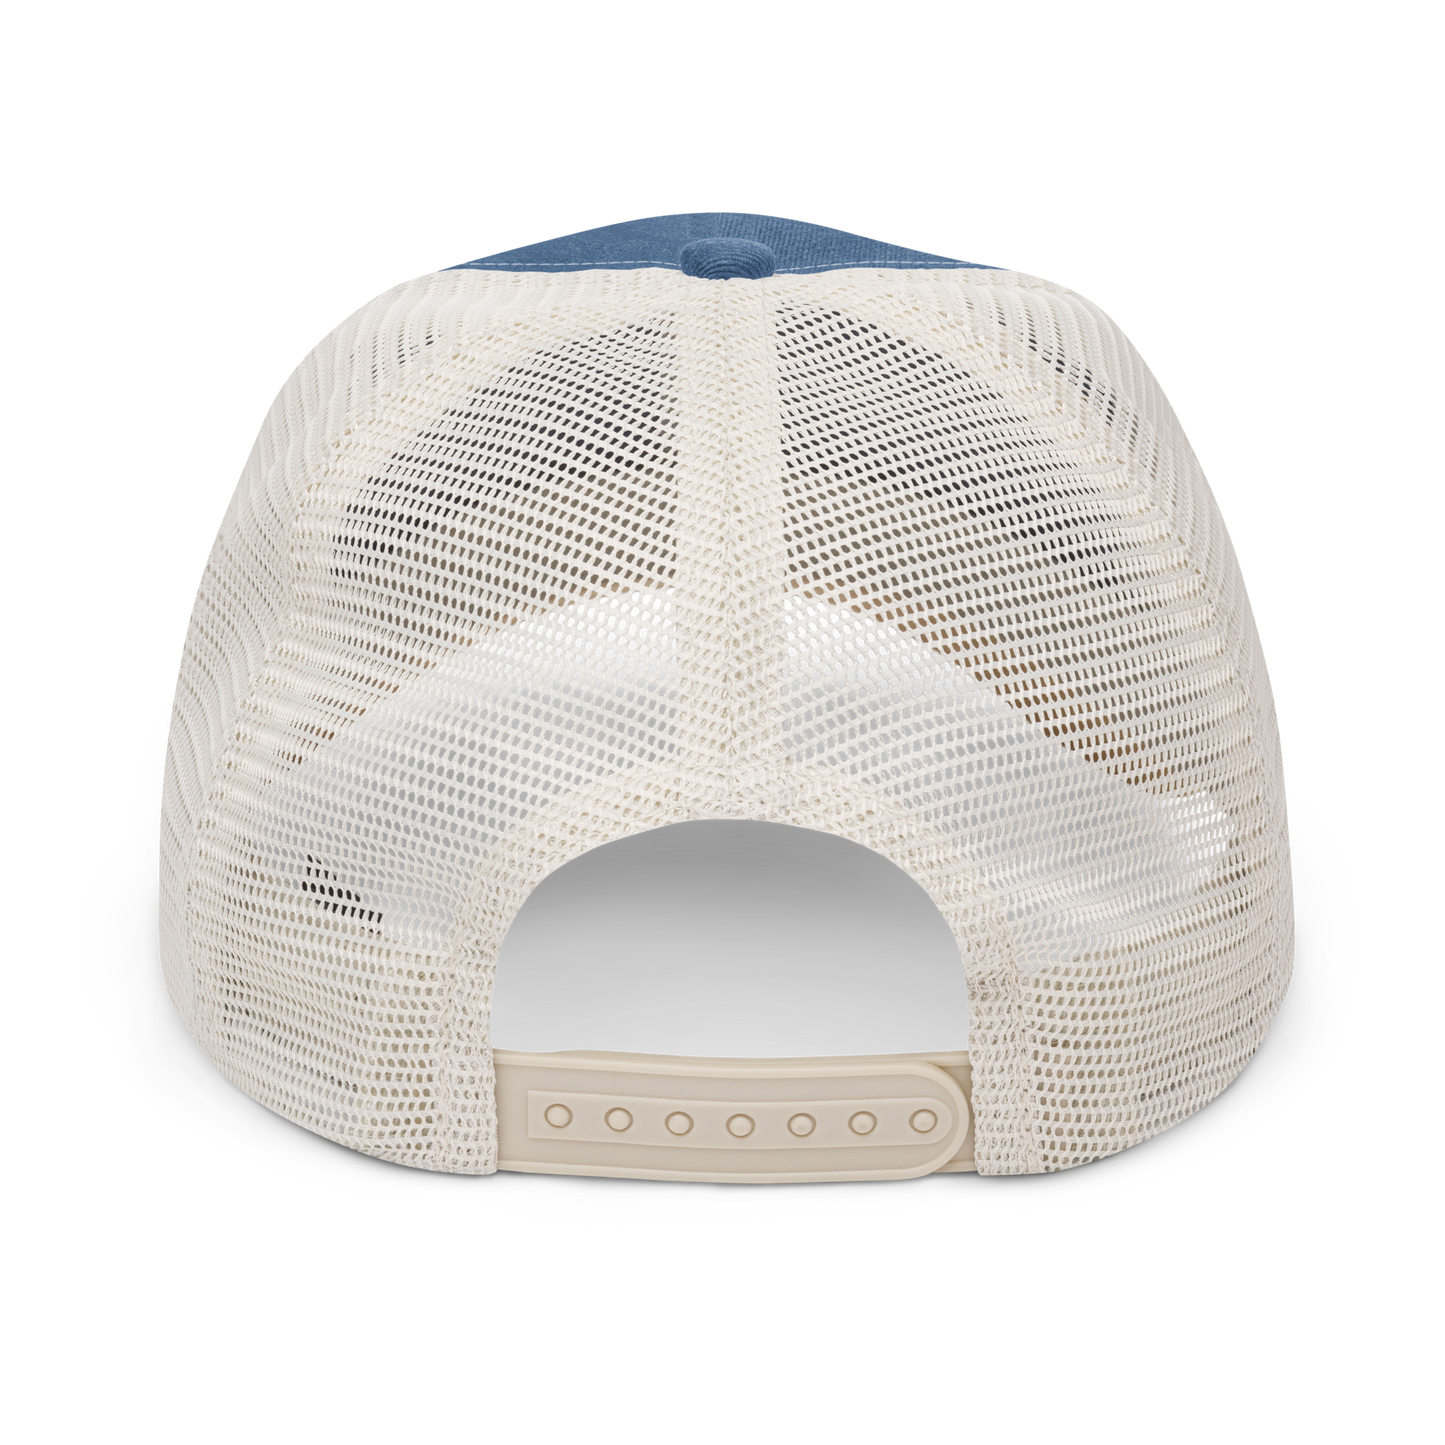 YHM Designs - YOW Ottawa Pigment-Dyed Trucker Cap - Crossed-X Design with Airport Code and Vintage Propliner - White Embroidery - Image 19